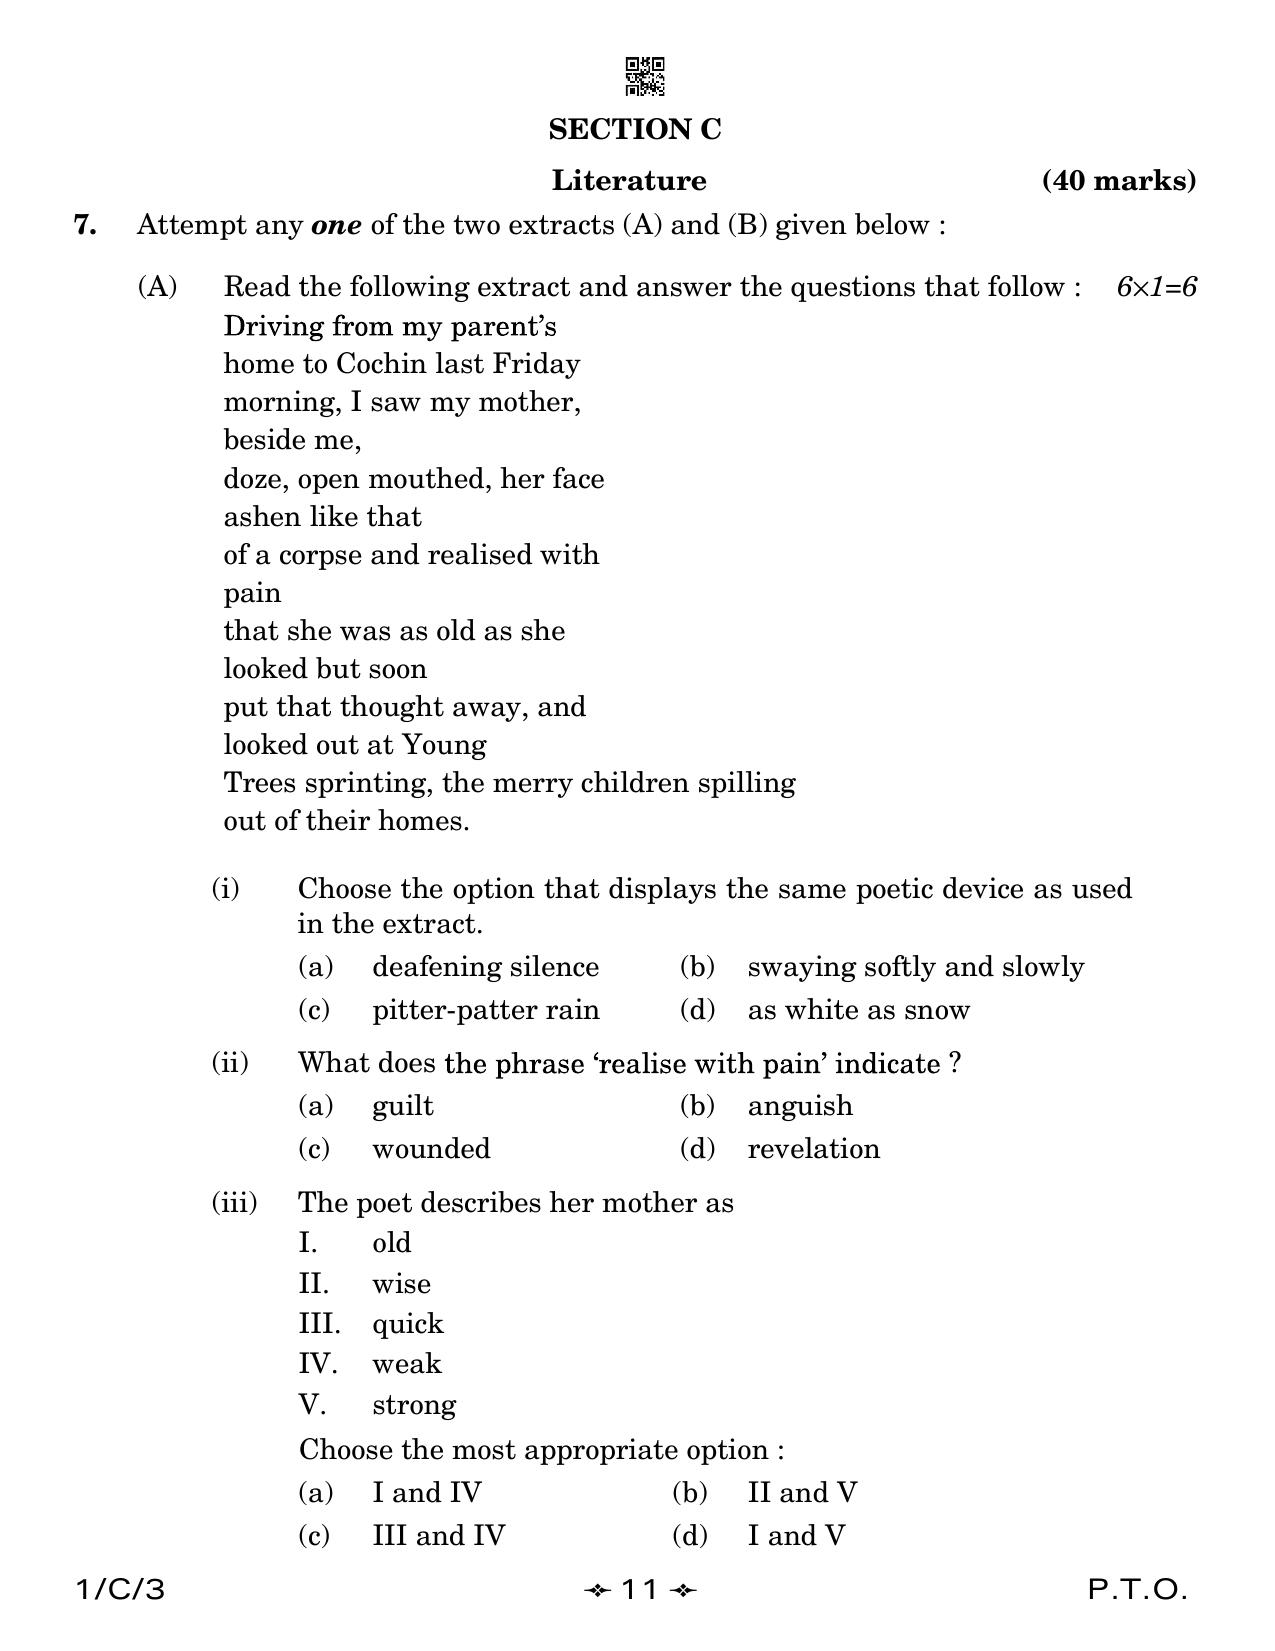 CBSE Class 12 1-3 English Core 2023 (Compartment) Question Paper - Page 11